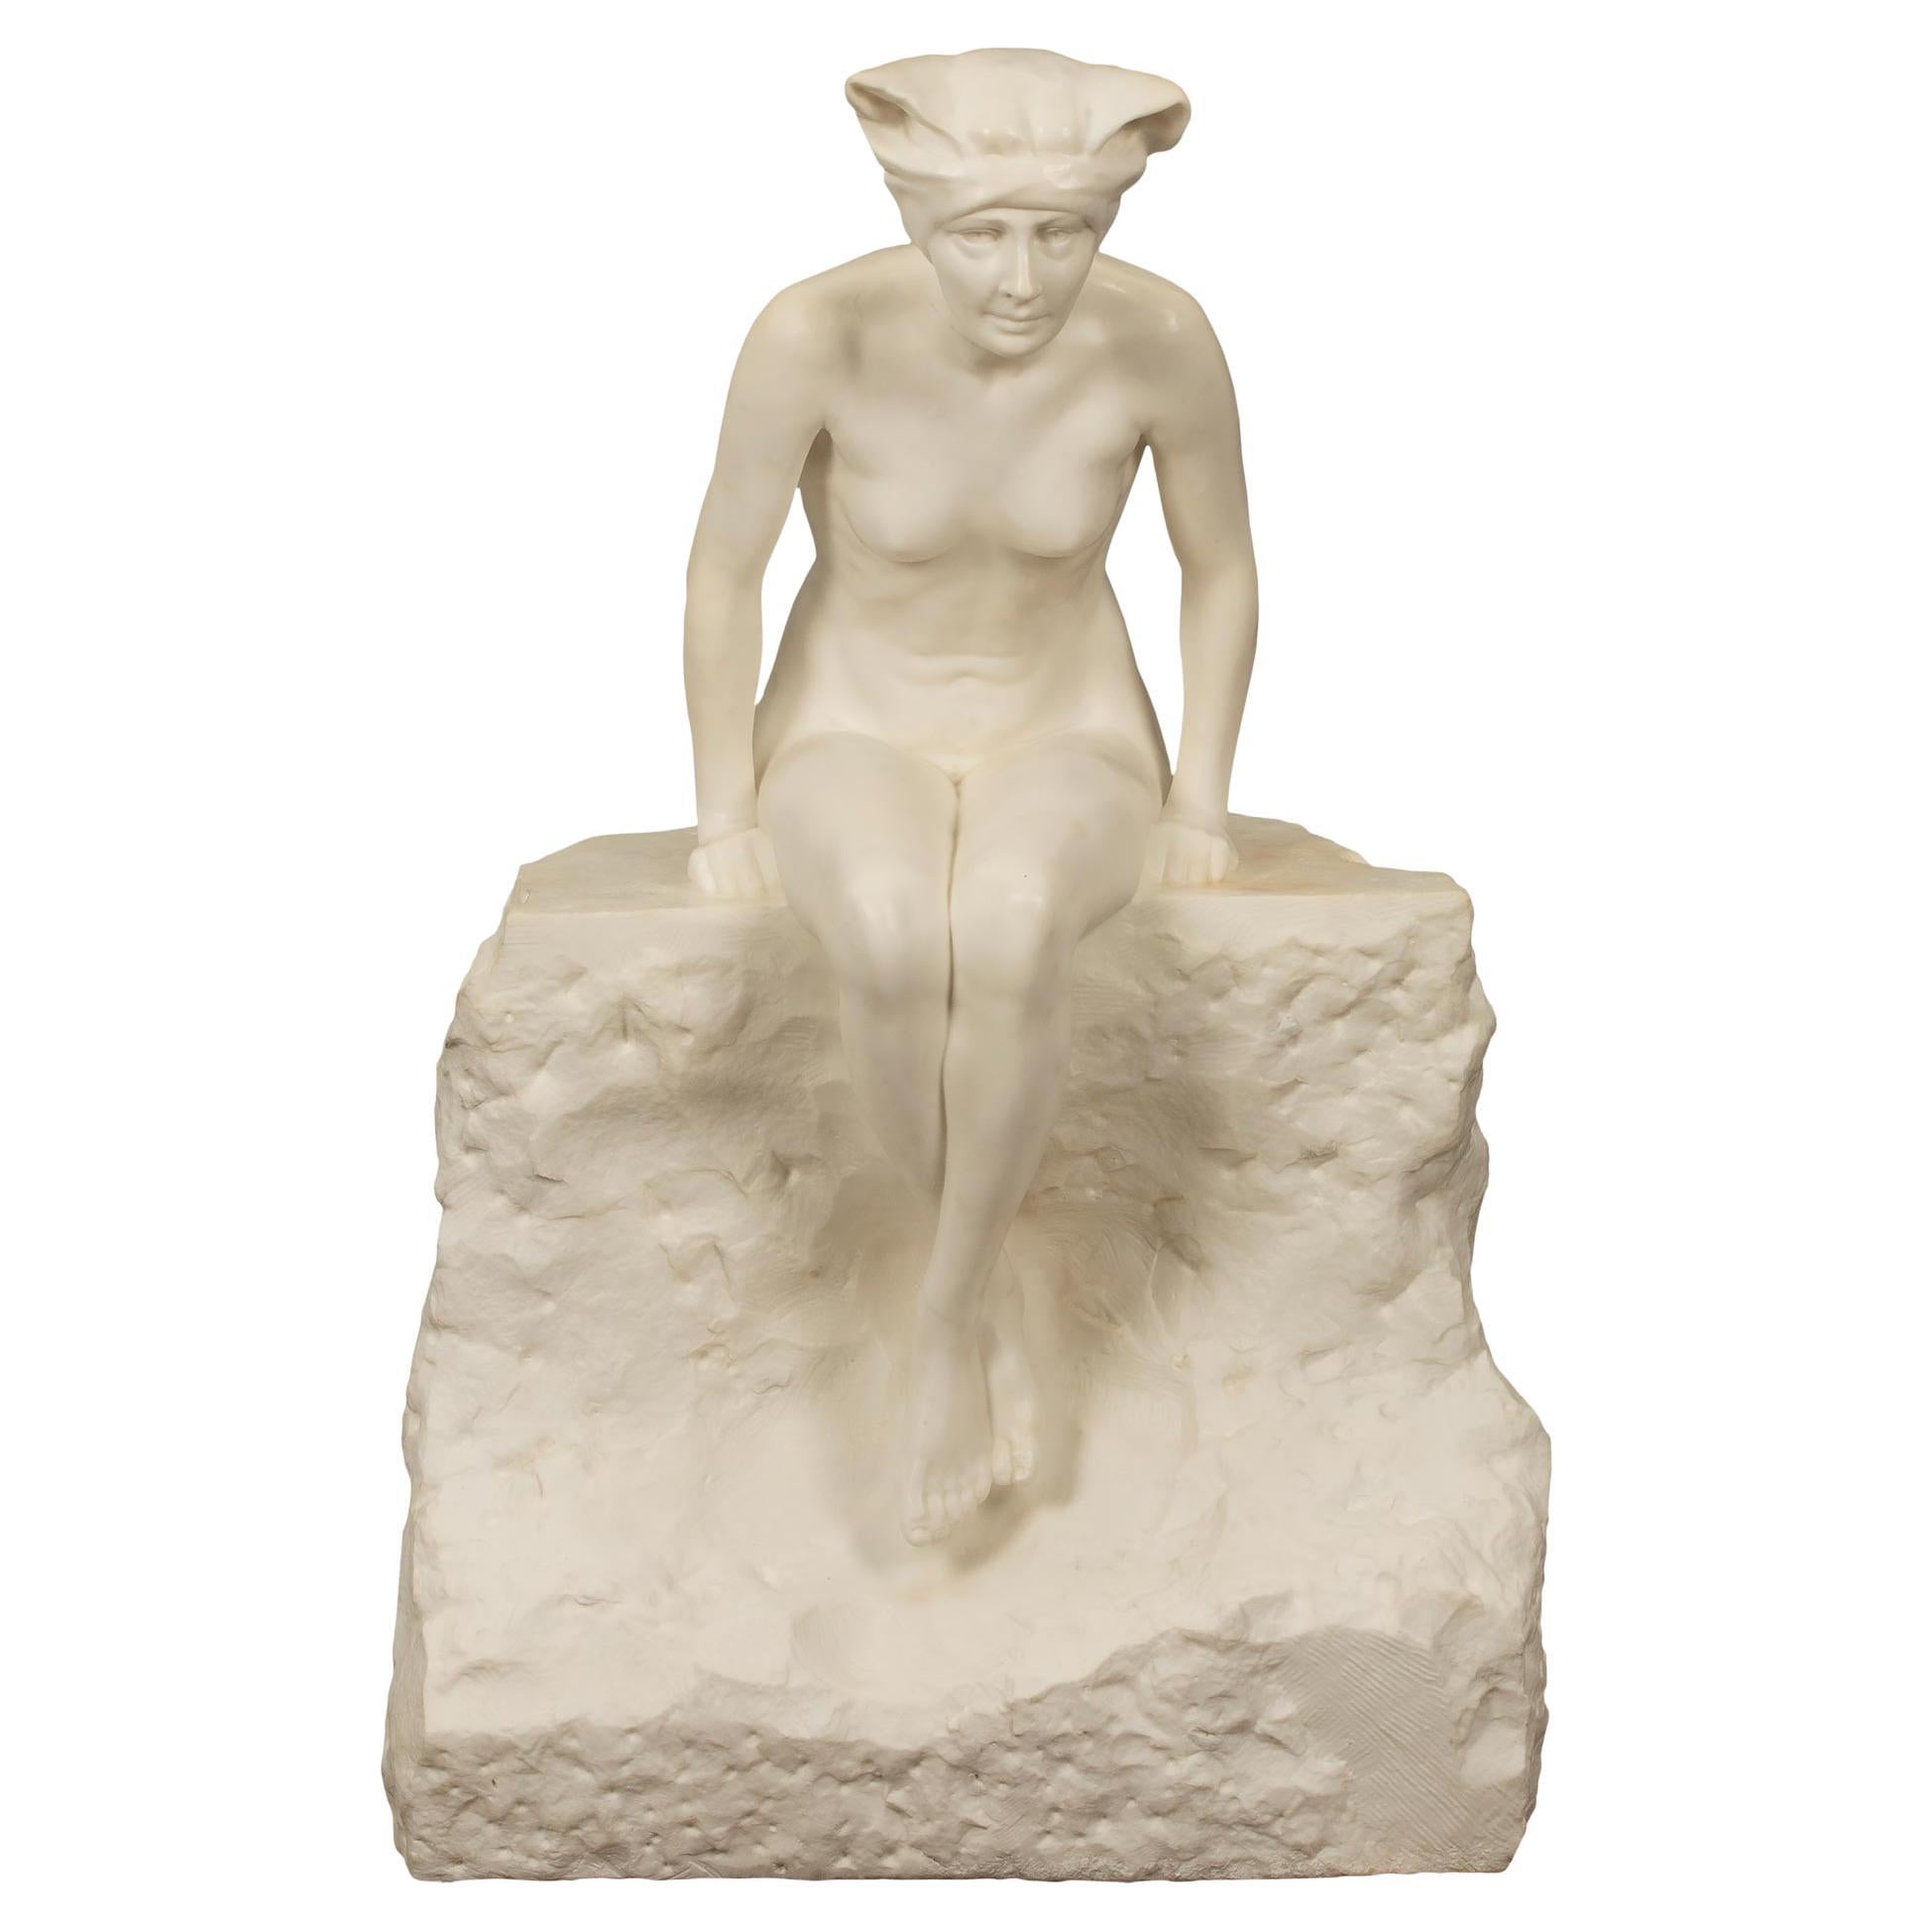 Italian 19th Century White Carrara Marble Statue of a Maiden Sitting on a Rock For Sale